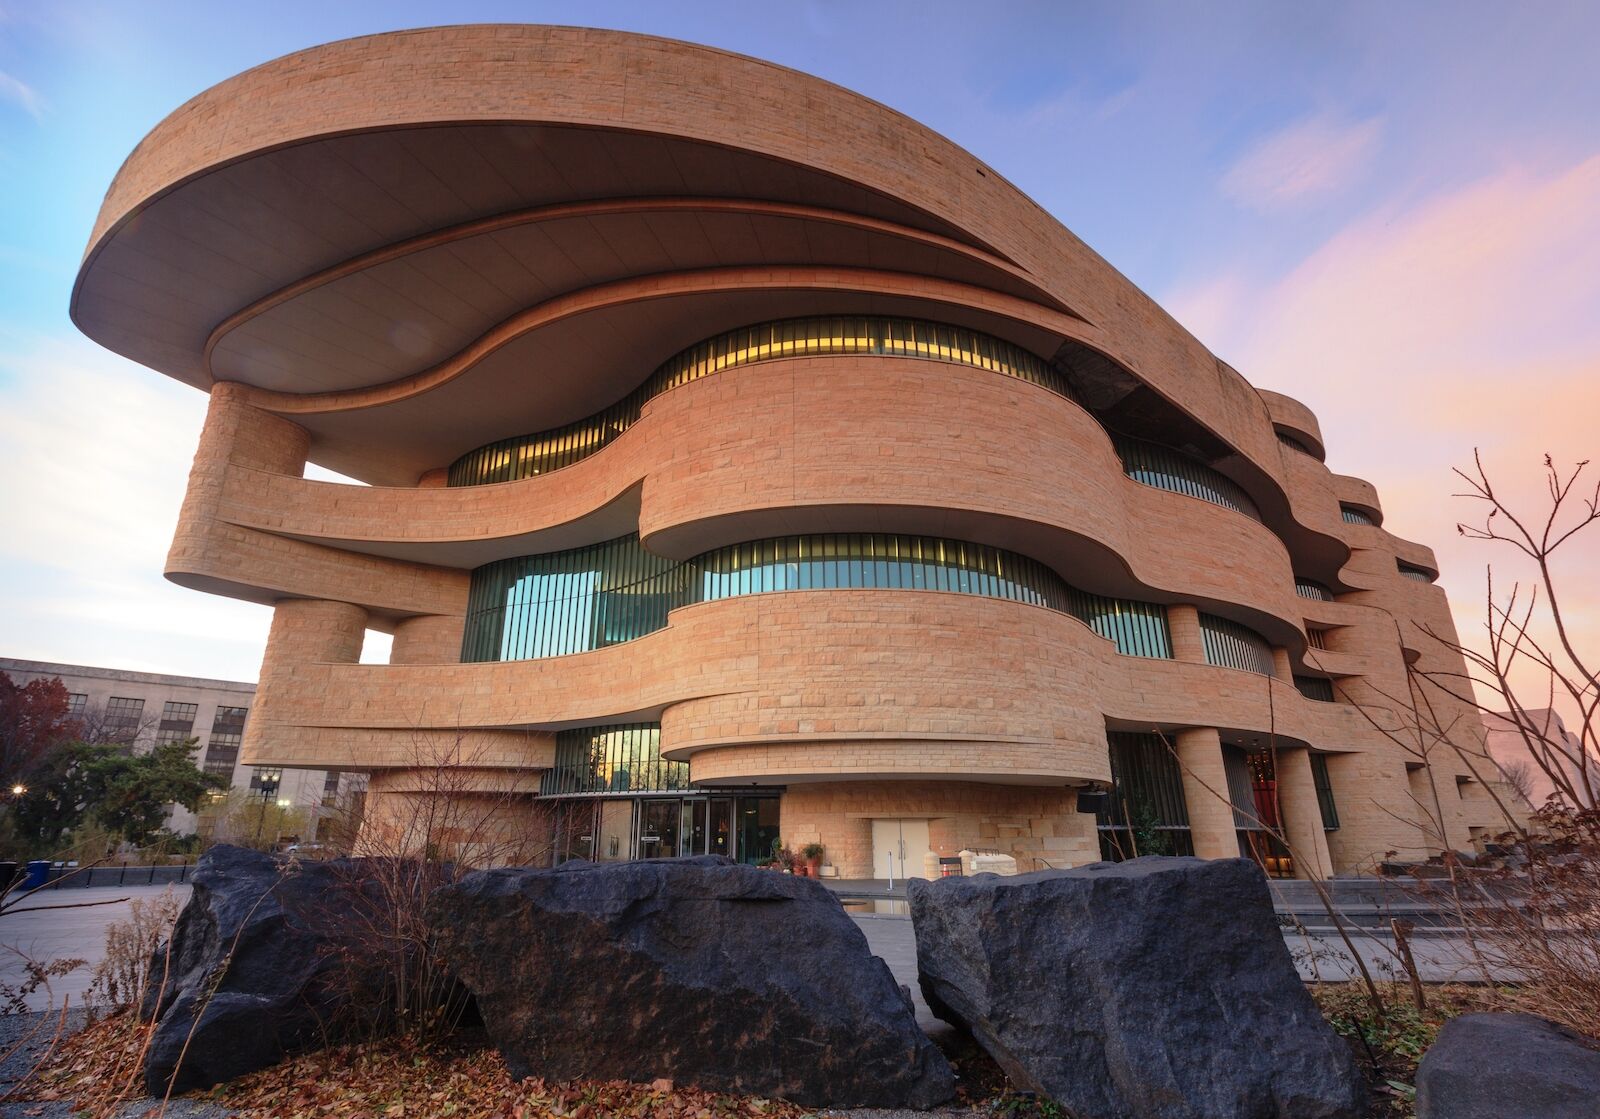 The National Museum of the American Indian is a Smithsonian museum